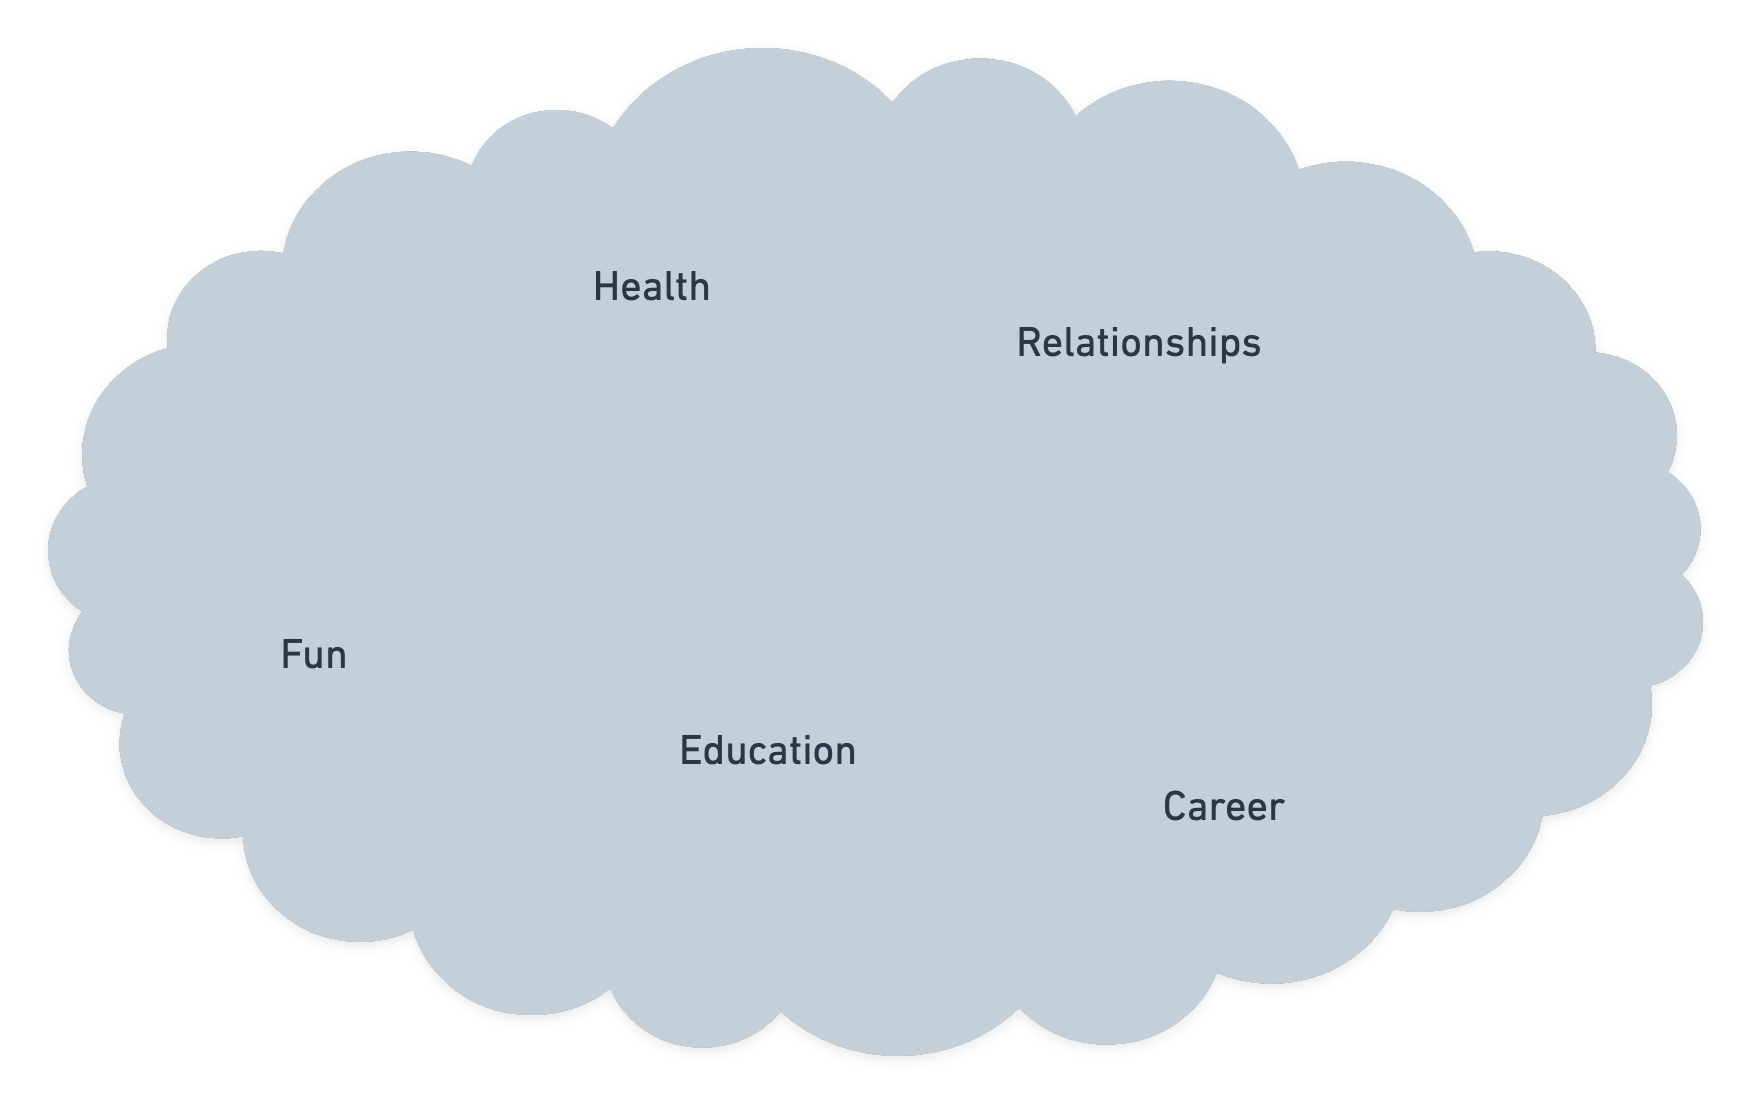 A mind map cloud of the five categories: Health, Relationships, Fun, Education, and Career.